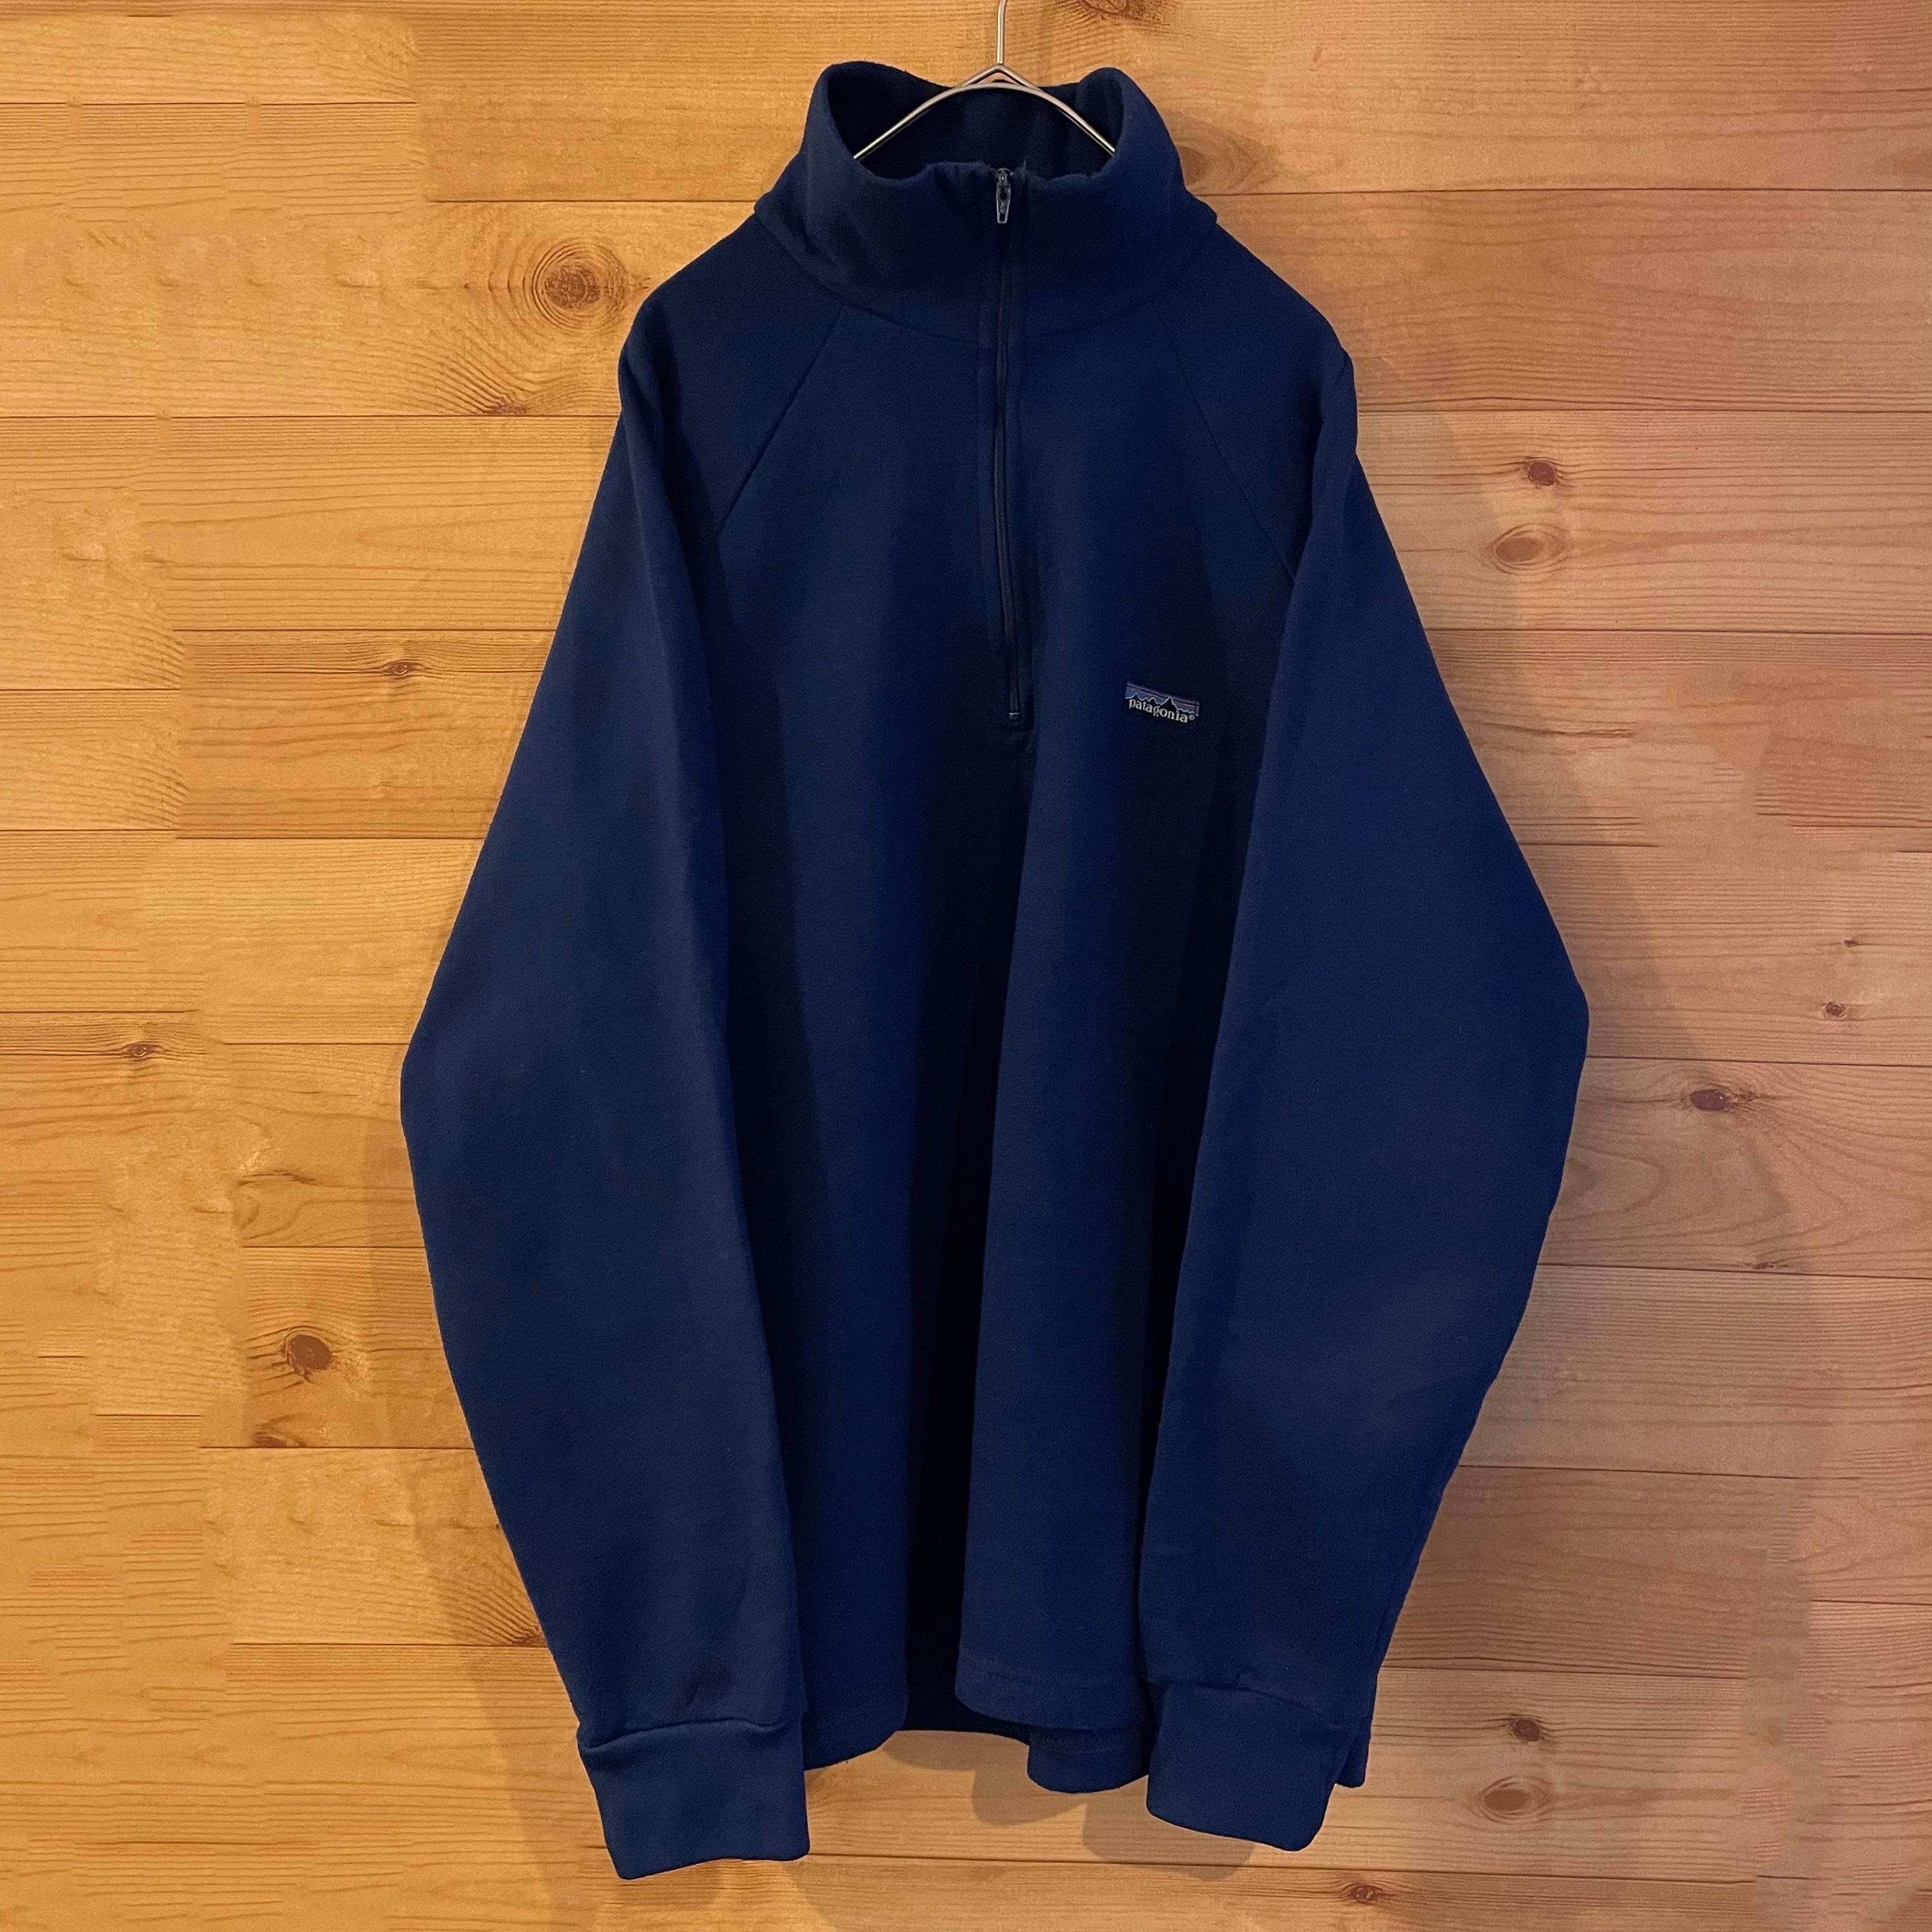 Problem antage Aftensmad Patagonia】80s USA製 ハーフジップ スウェット キャプリーン XL デカタグ ワンポイント パタゴニア アメリカ古着 |  古着屋手ぶらがbest